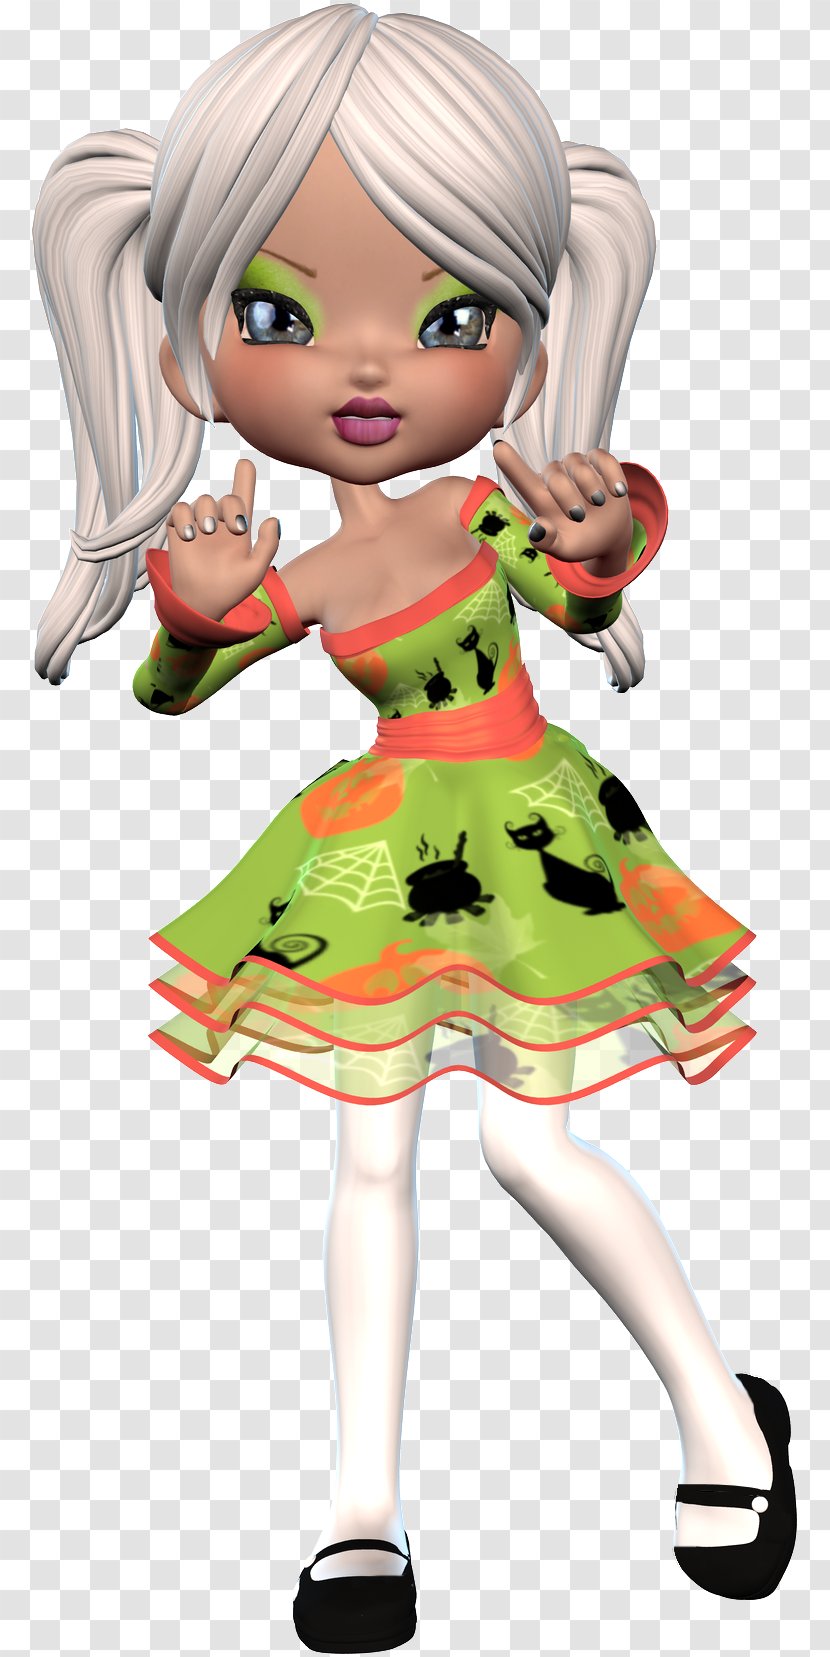 Child February Day - Doll Transparent PNG